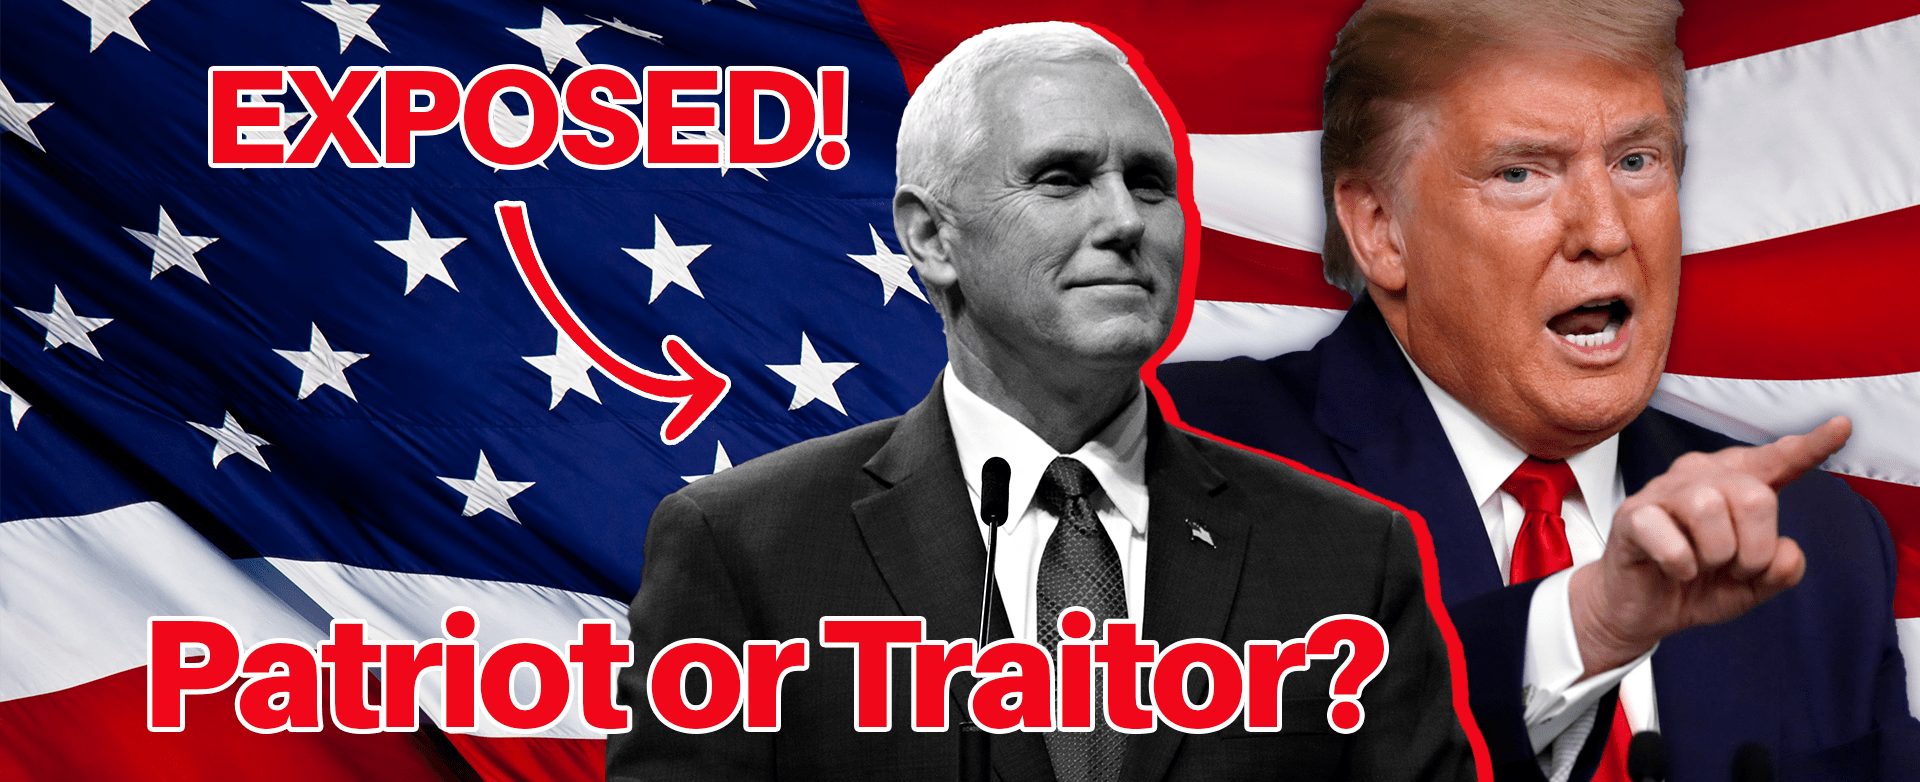 MyPatriotsNetwork-Pence: Patriot or Traitor? January 6 2021 Update